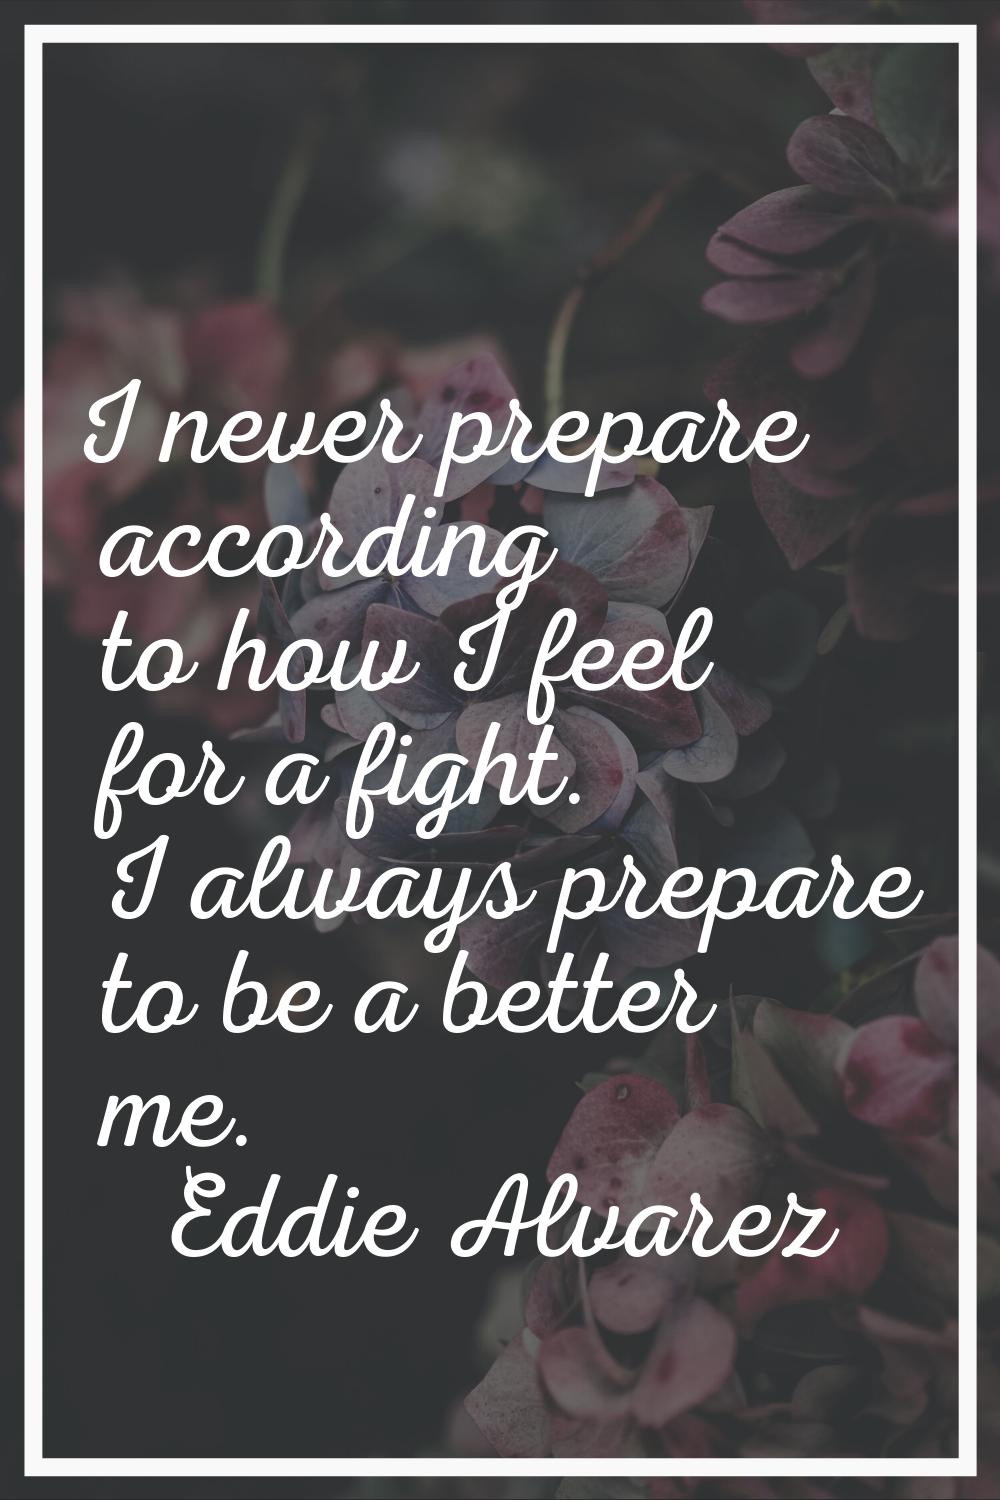 I never prepare according to how I feel for a fight. I always prepare to be a better me.